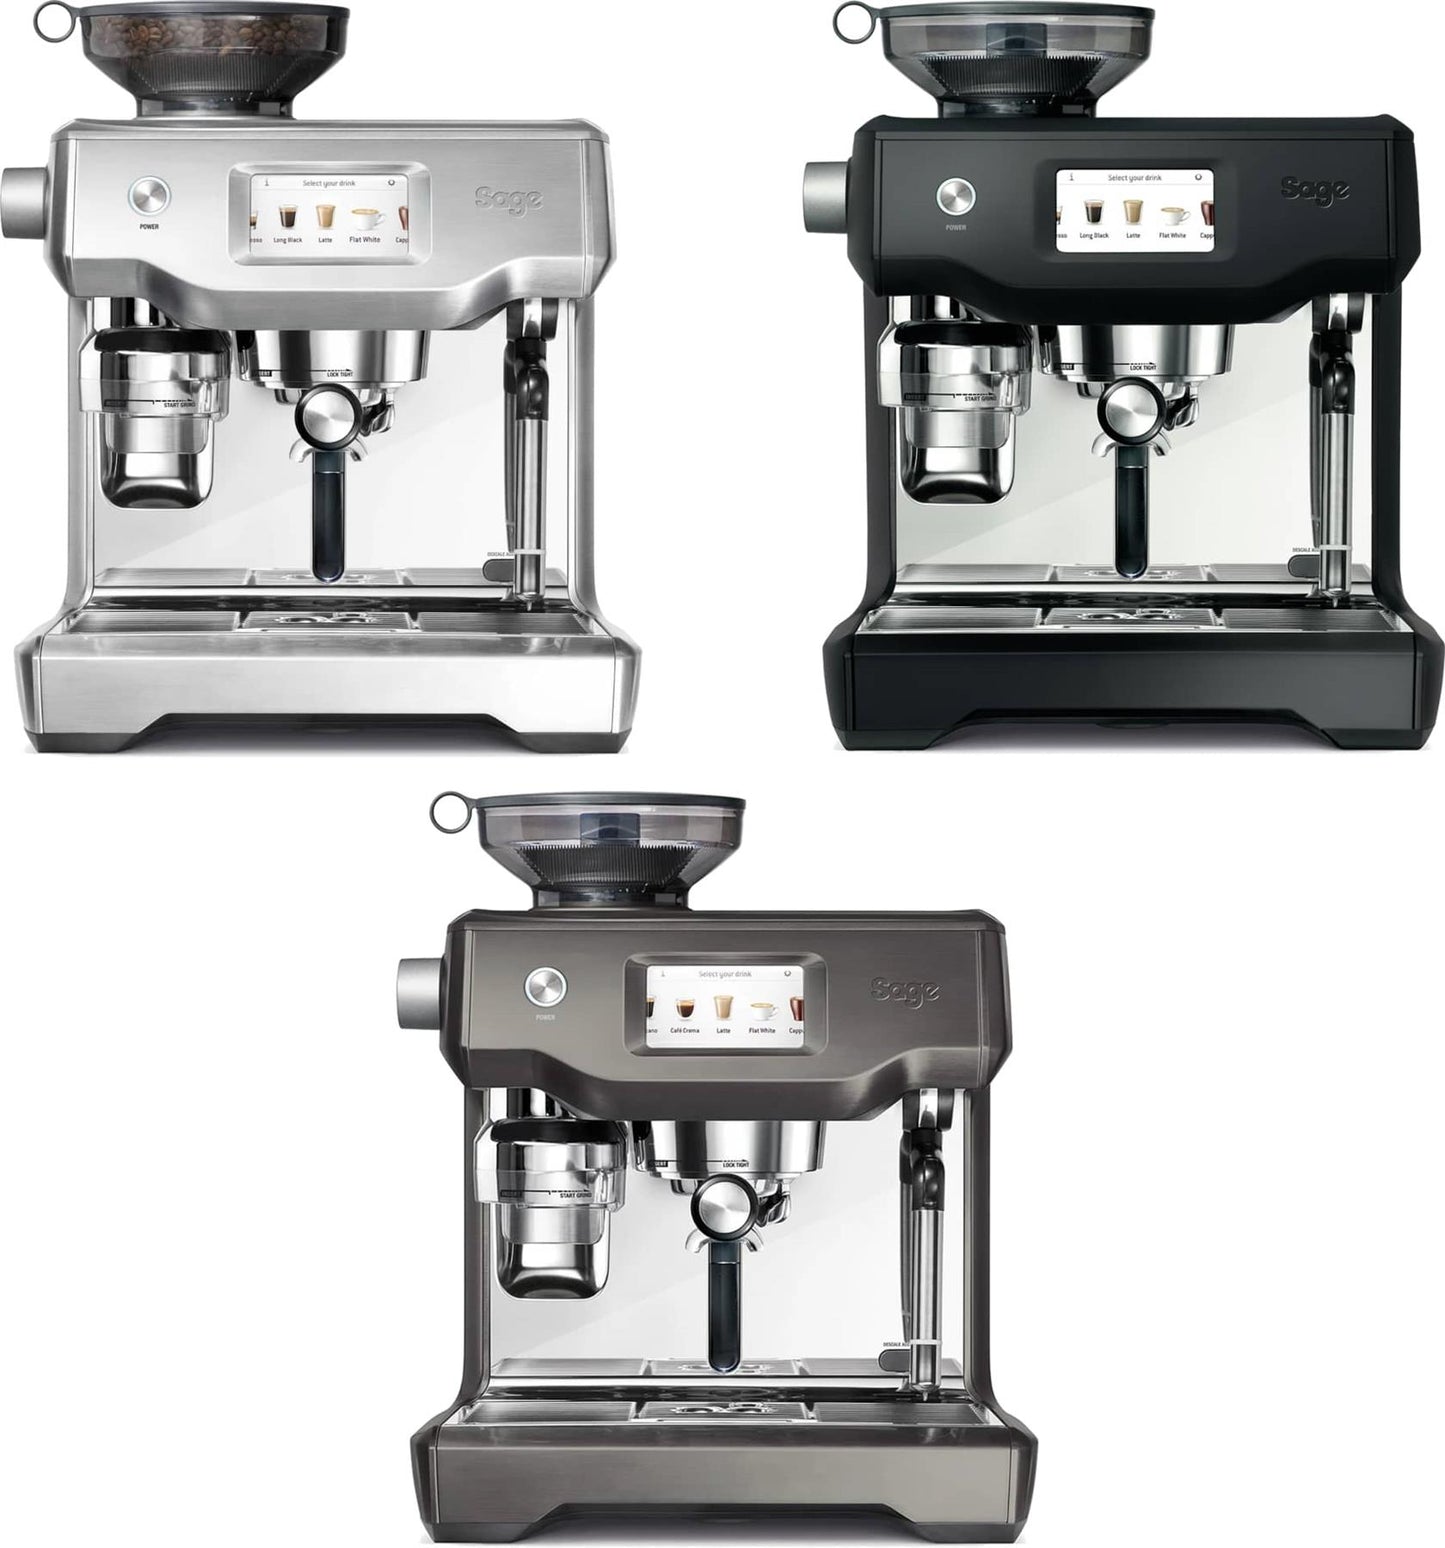 Sage The Oracle Touch SES990 Coffee Machine